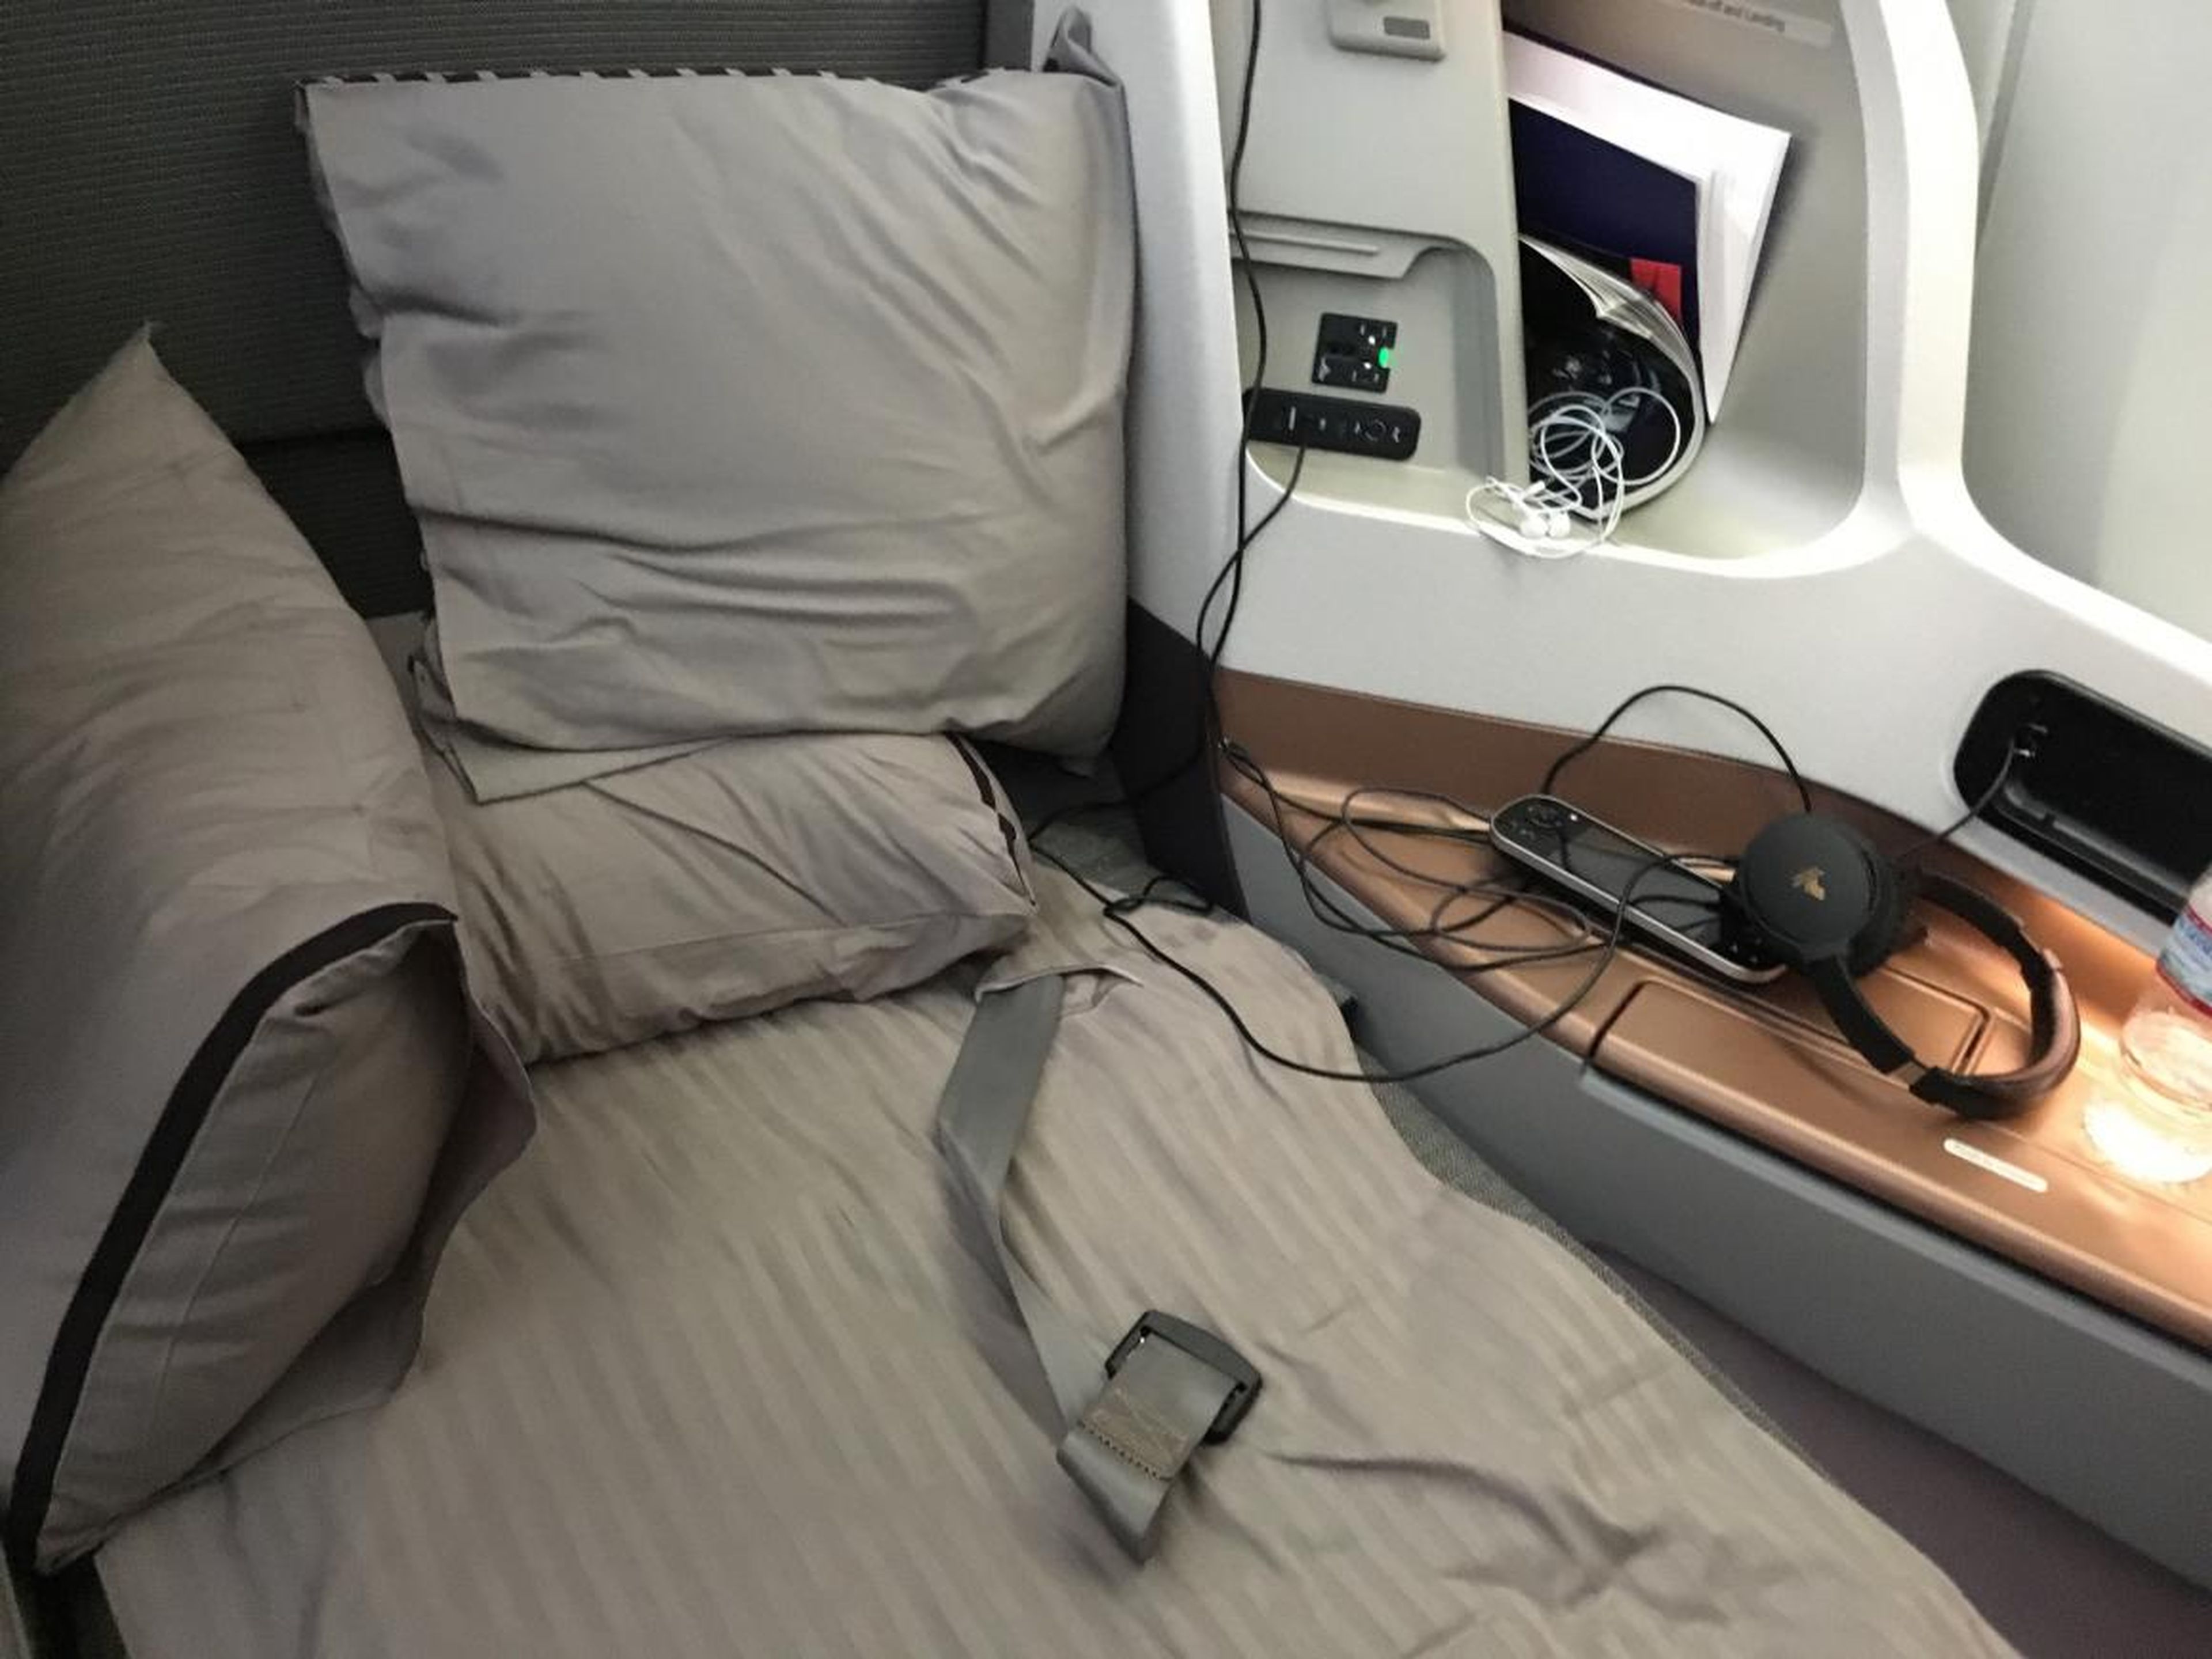 I found Singapore's business-class seat and bed to be comfortable and spacious.